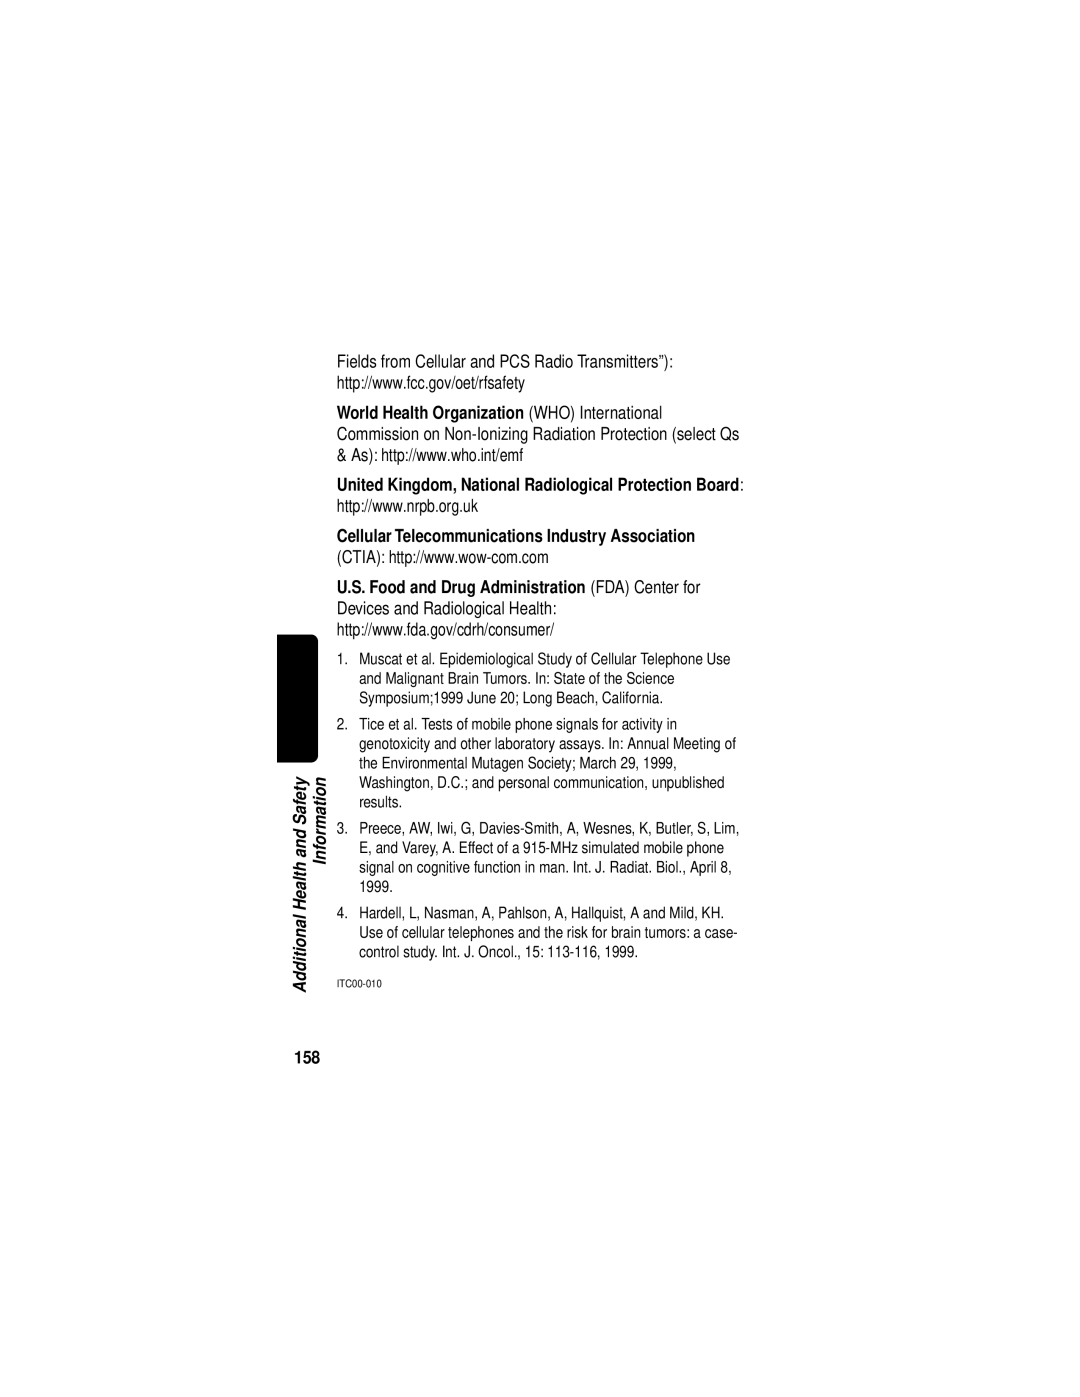 Motorola C331 manual Fields from Cellular and PCS Radio Transmitters, Food and Drug Administration FDA Center for, 158 